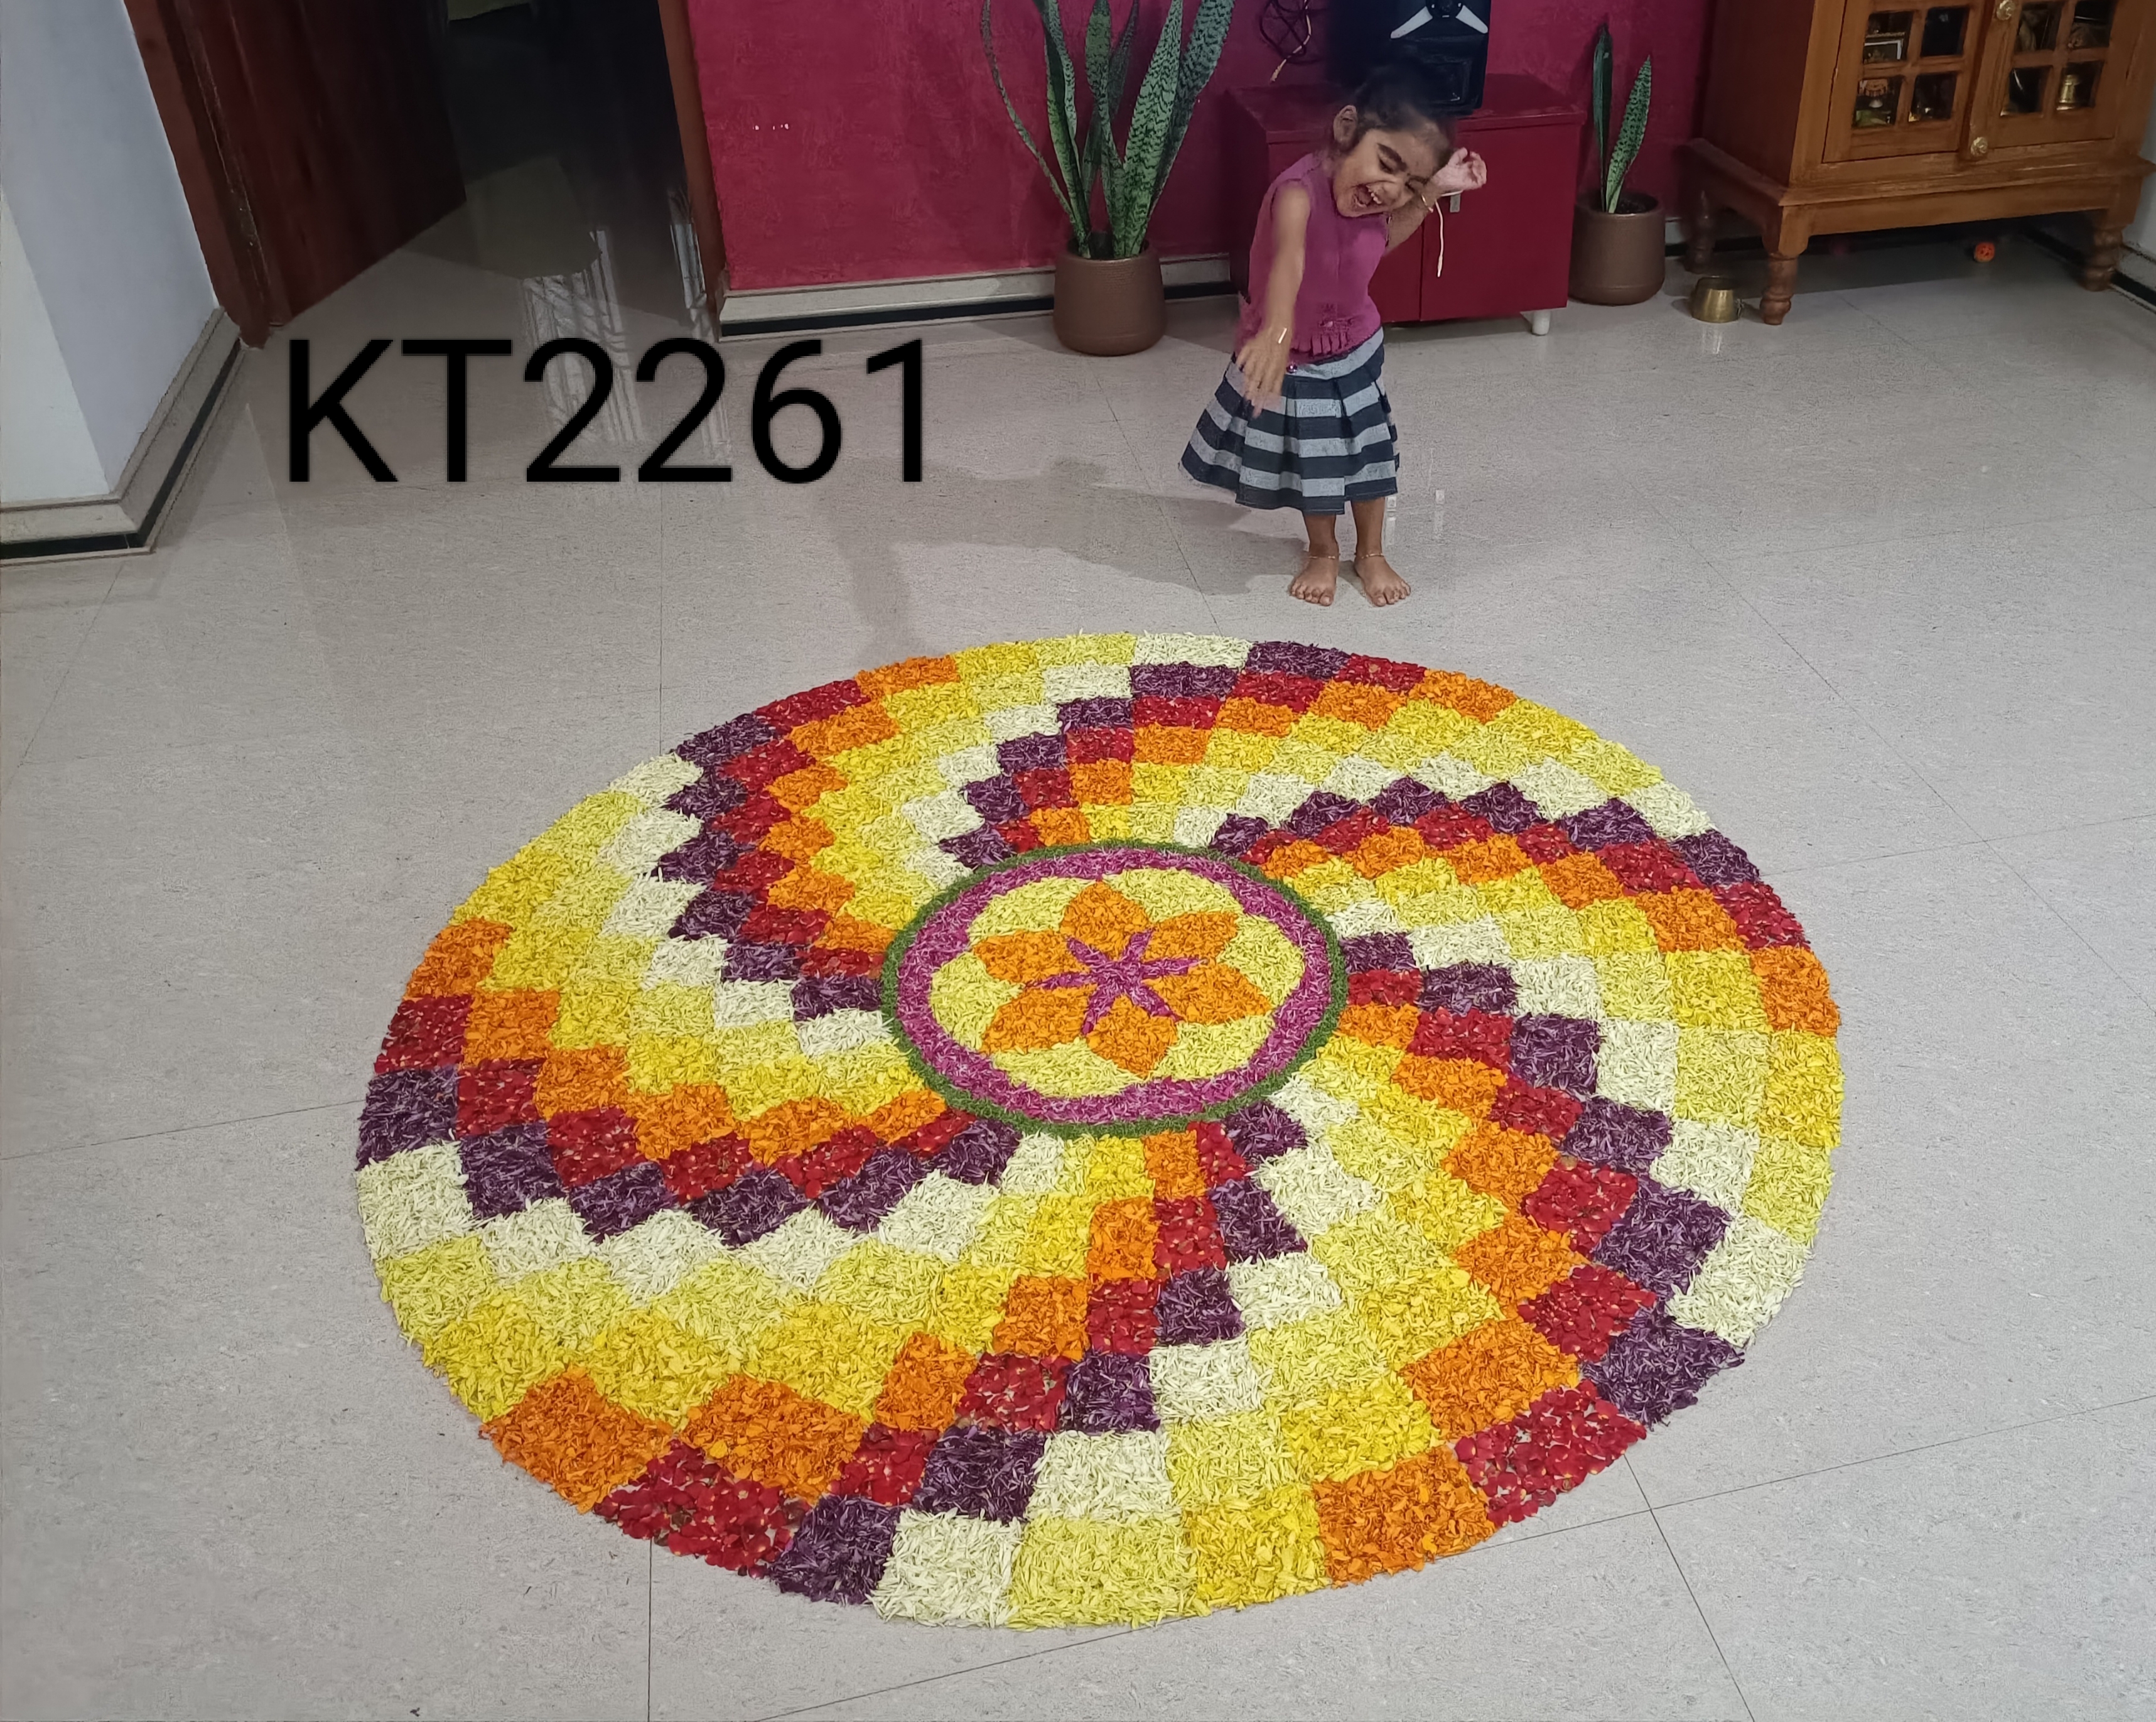 60 Most Beautiful Pookalam Designs for Onam Festival - part 2